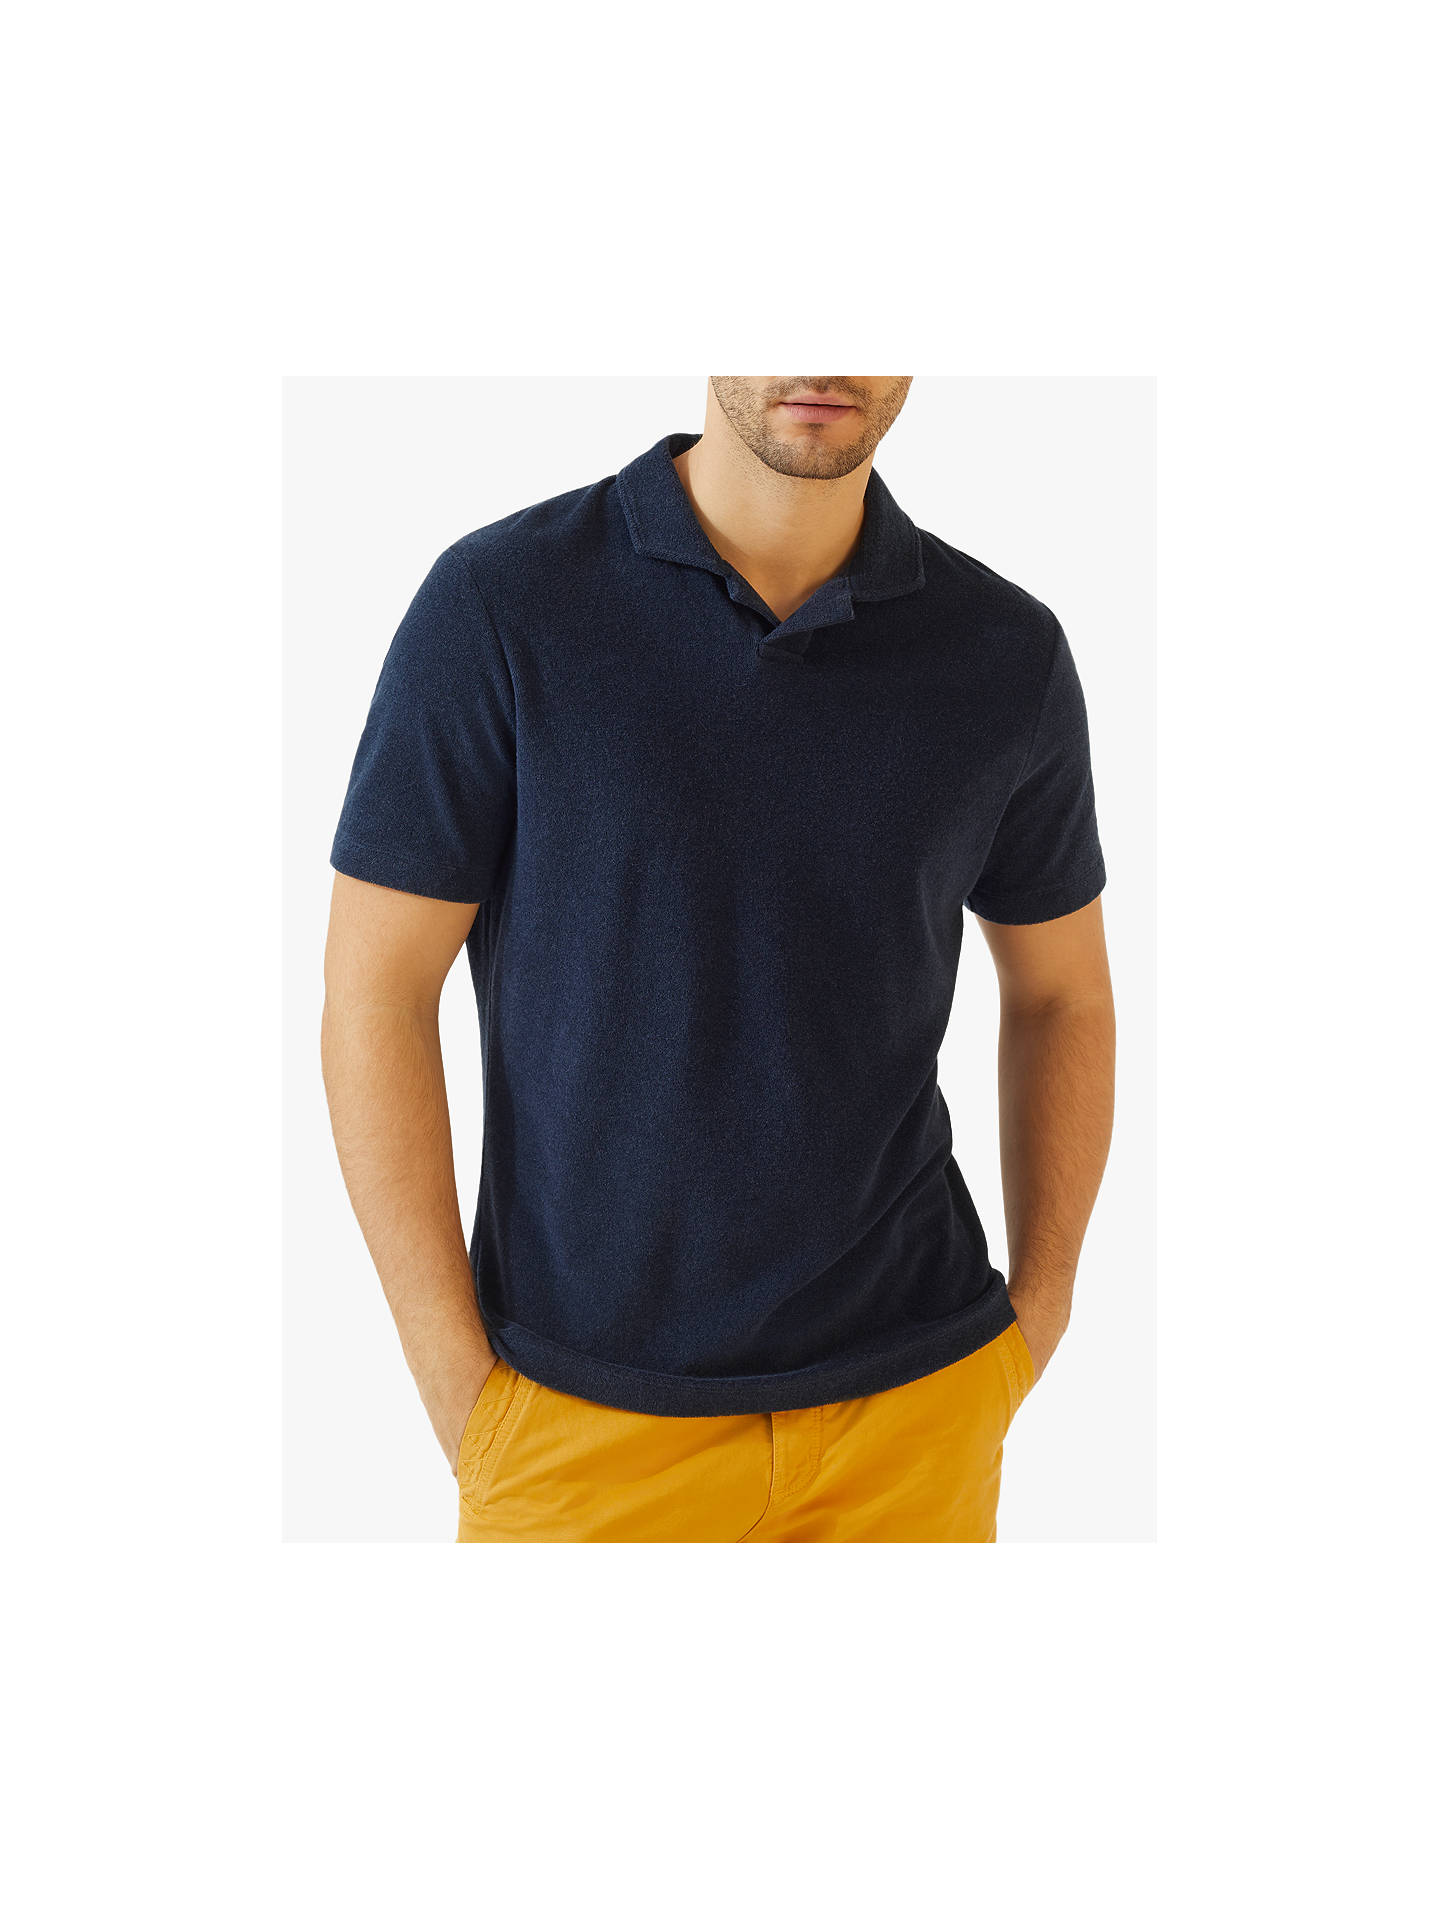 Jigsaw Terry Towelling Polo Shirt at John Lewis & Partners